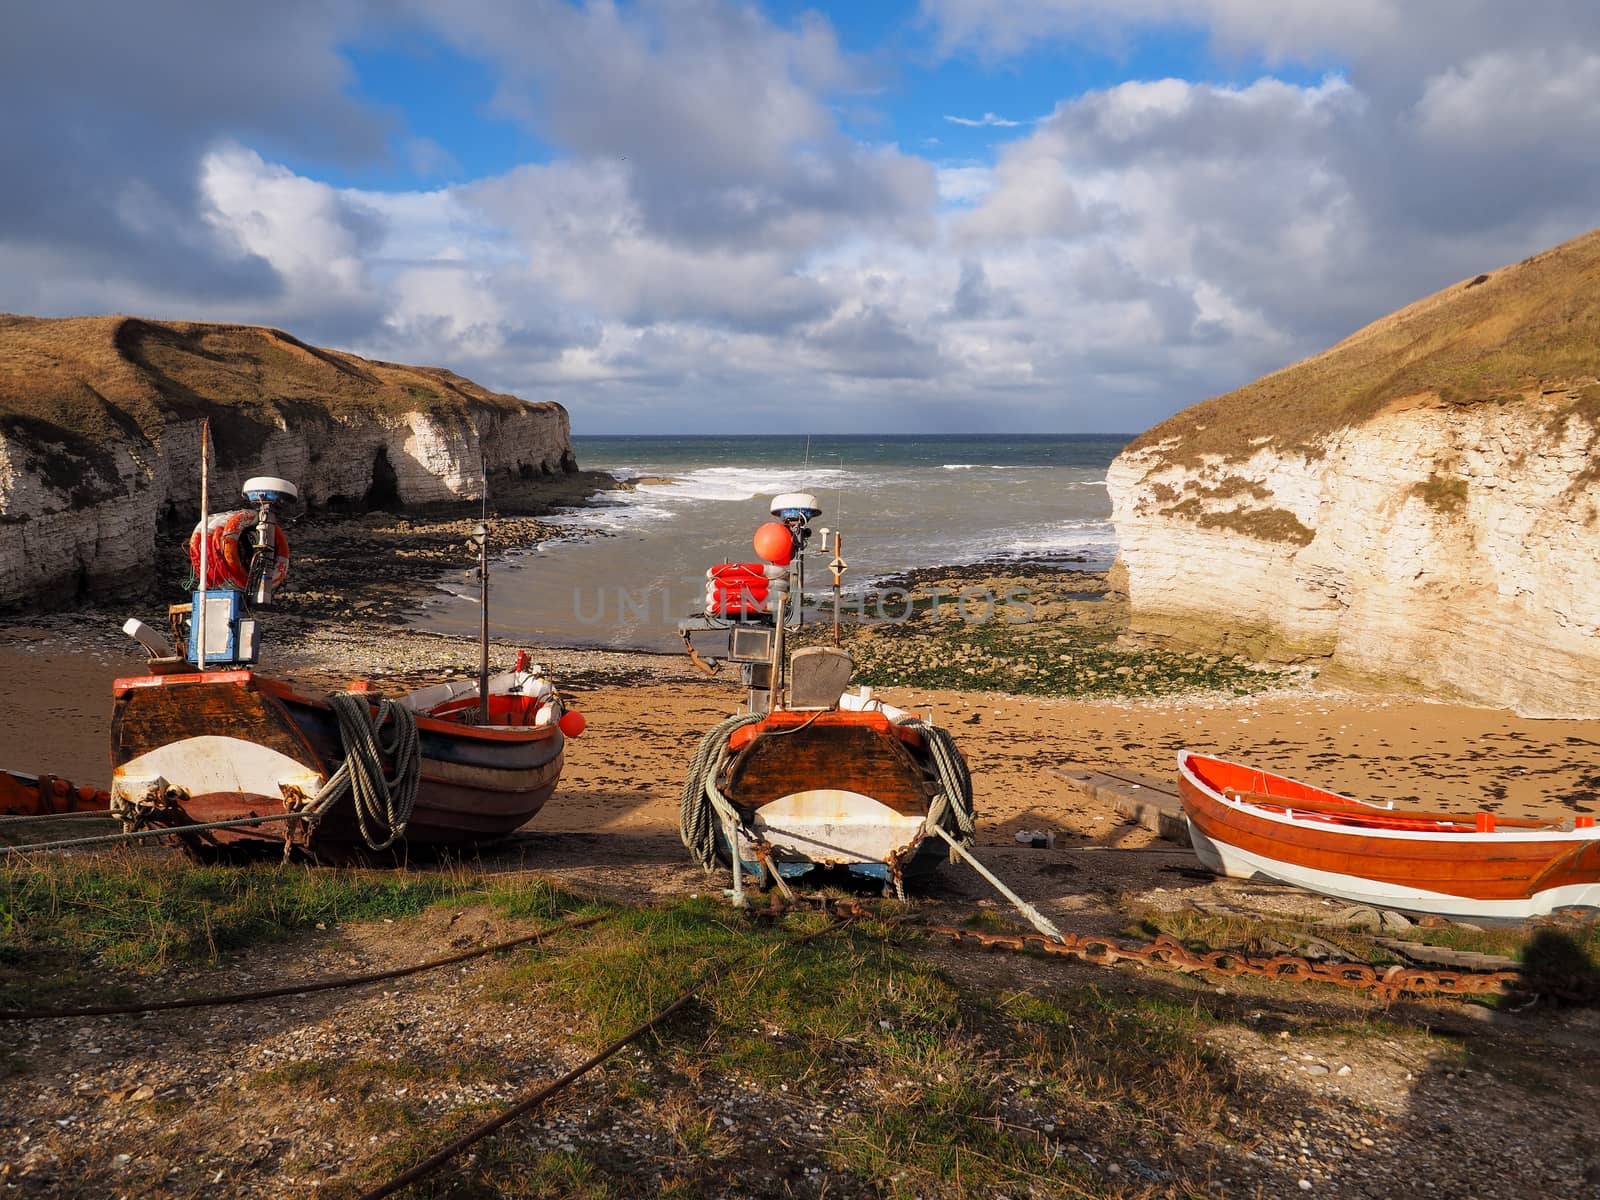 Colorful wooden and red and white fishing boats tied up on the beach in a cove waiting for the tide to come in with white cliffs in the background and a blue sky with clouds overhead.